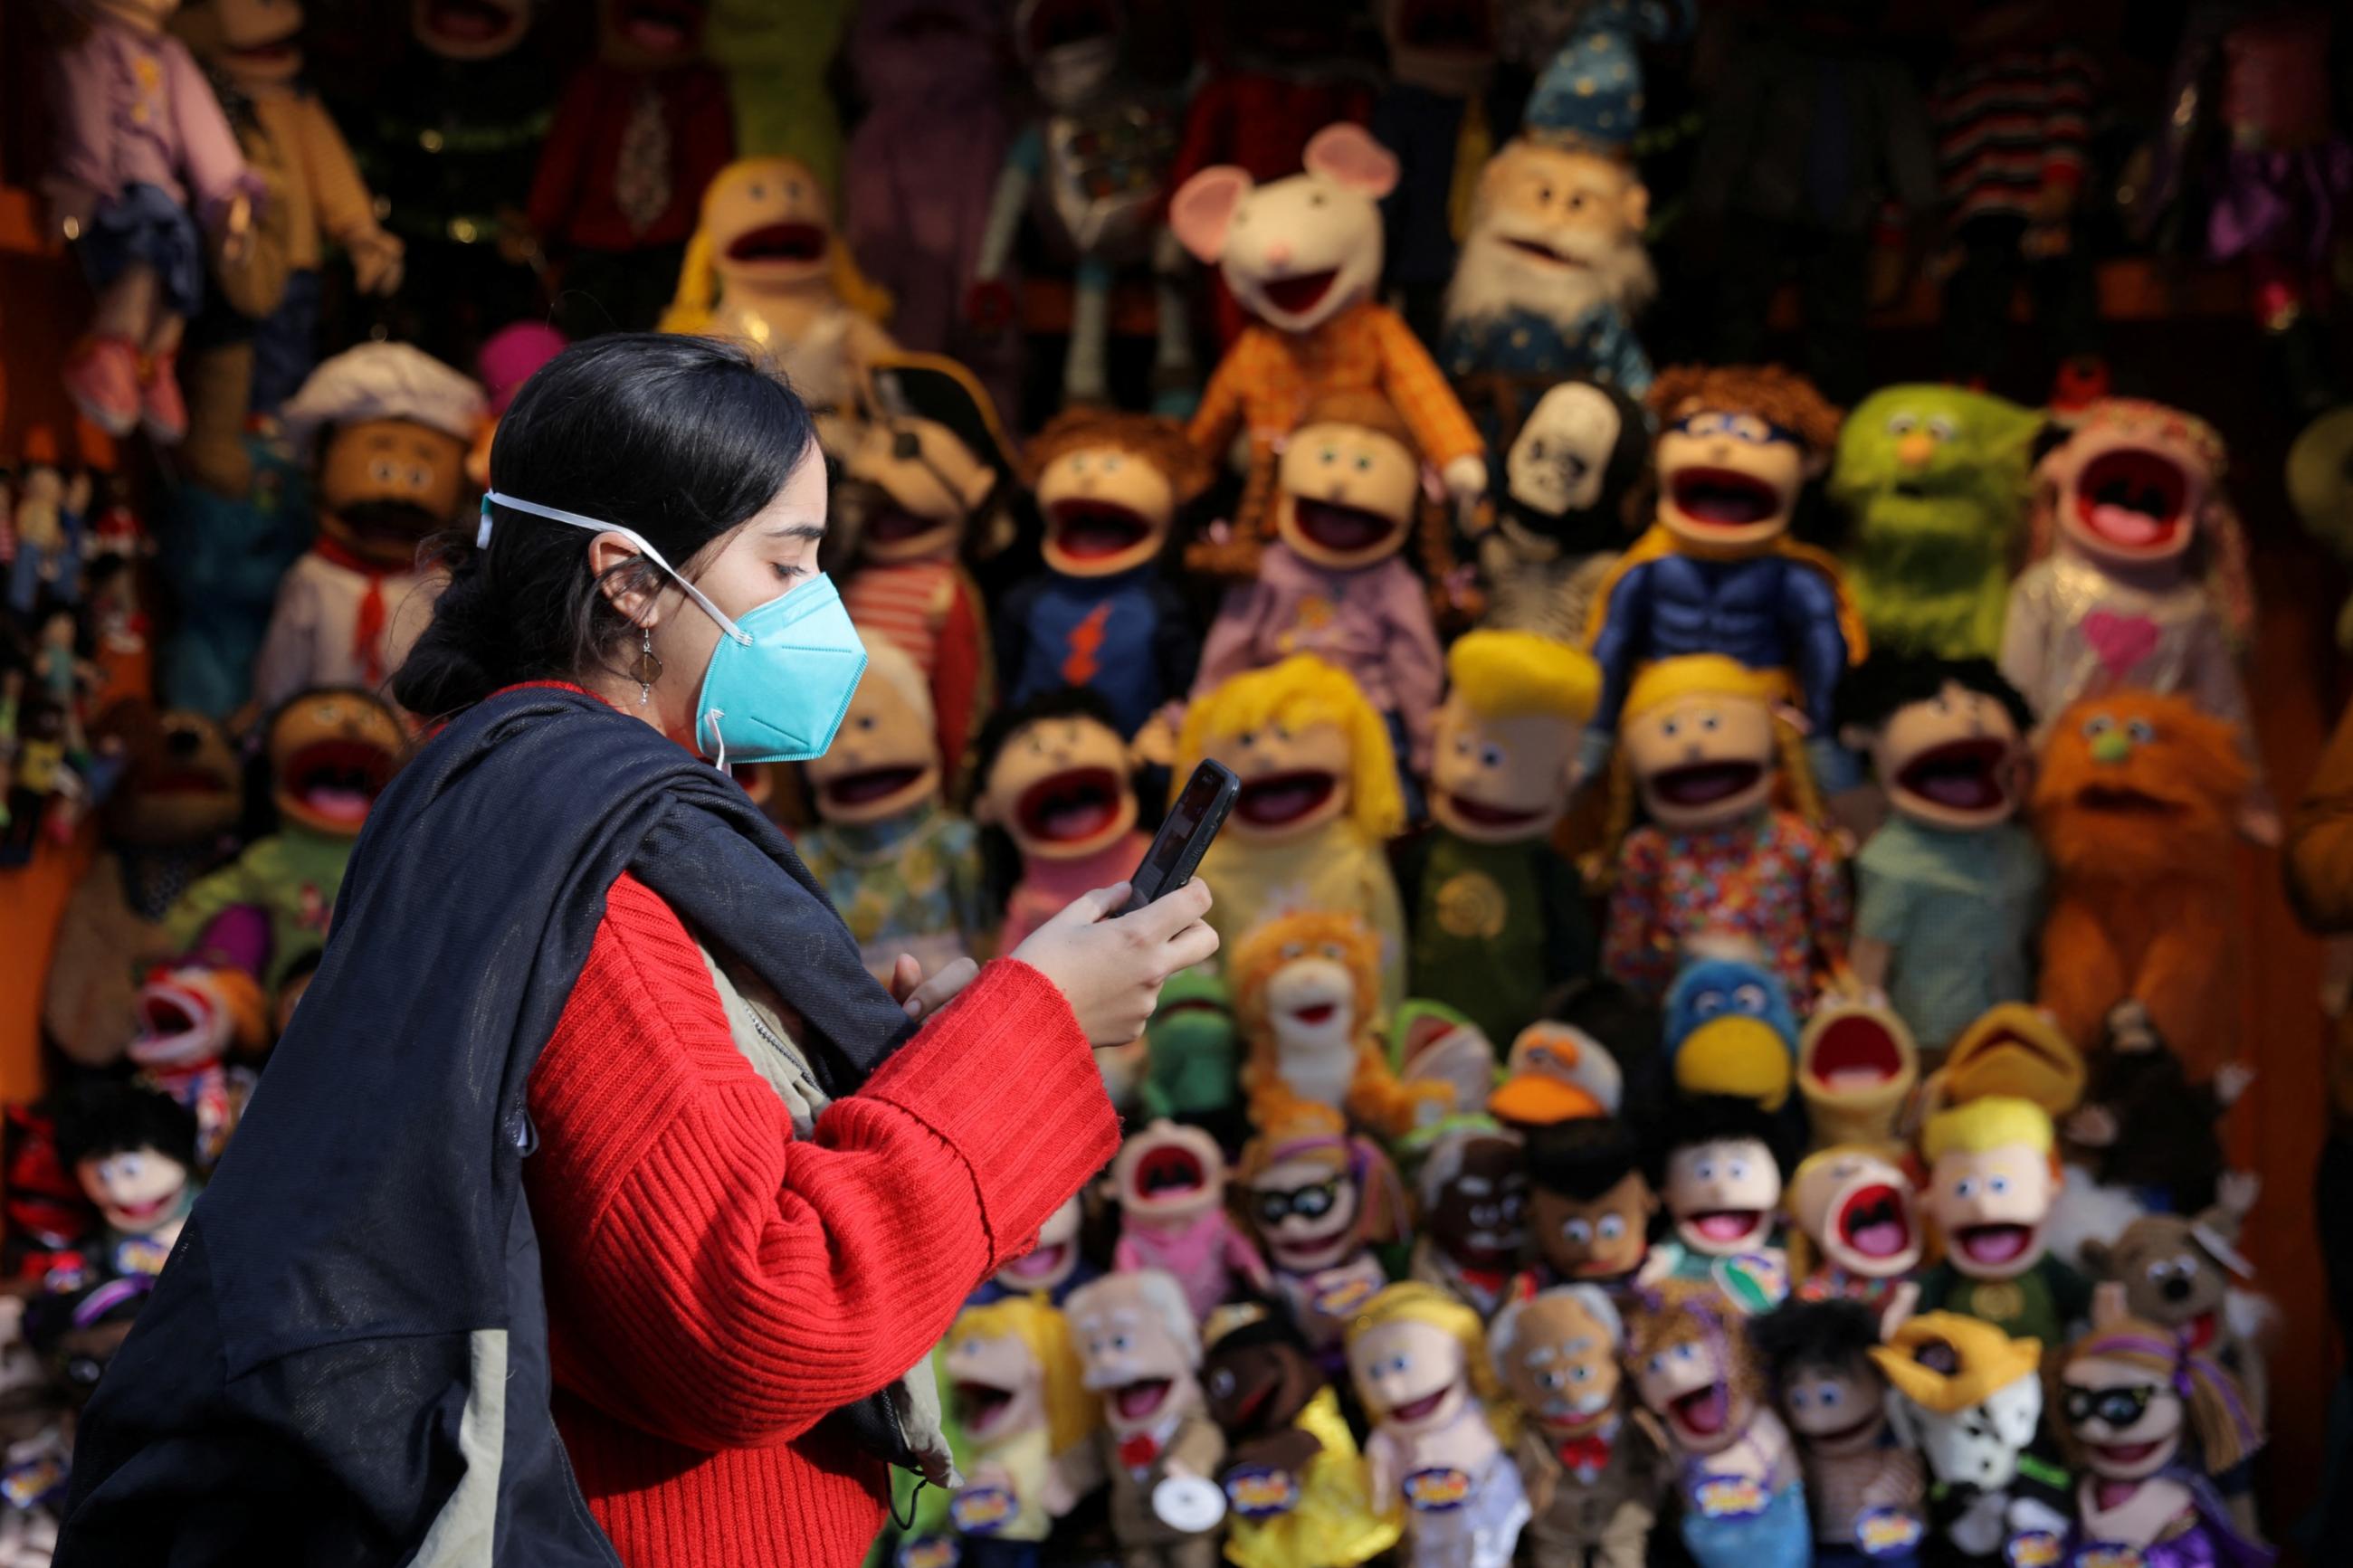 A woman in a red coat and blue mask checks her phone as she walks by a stall with colorful children's puppets